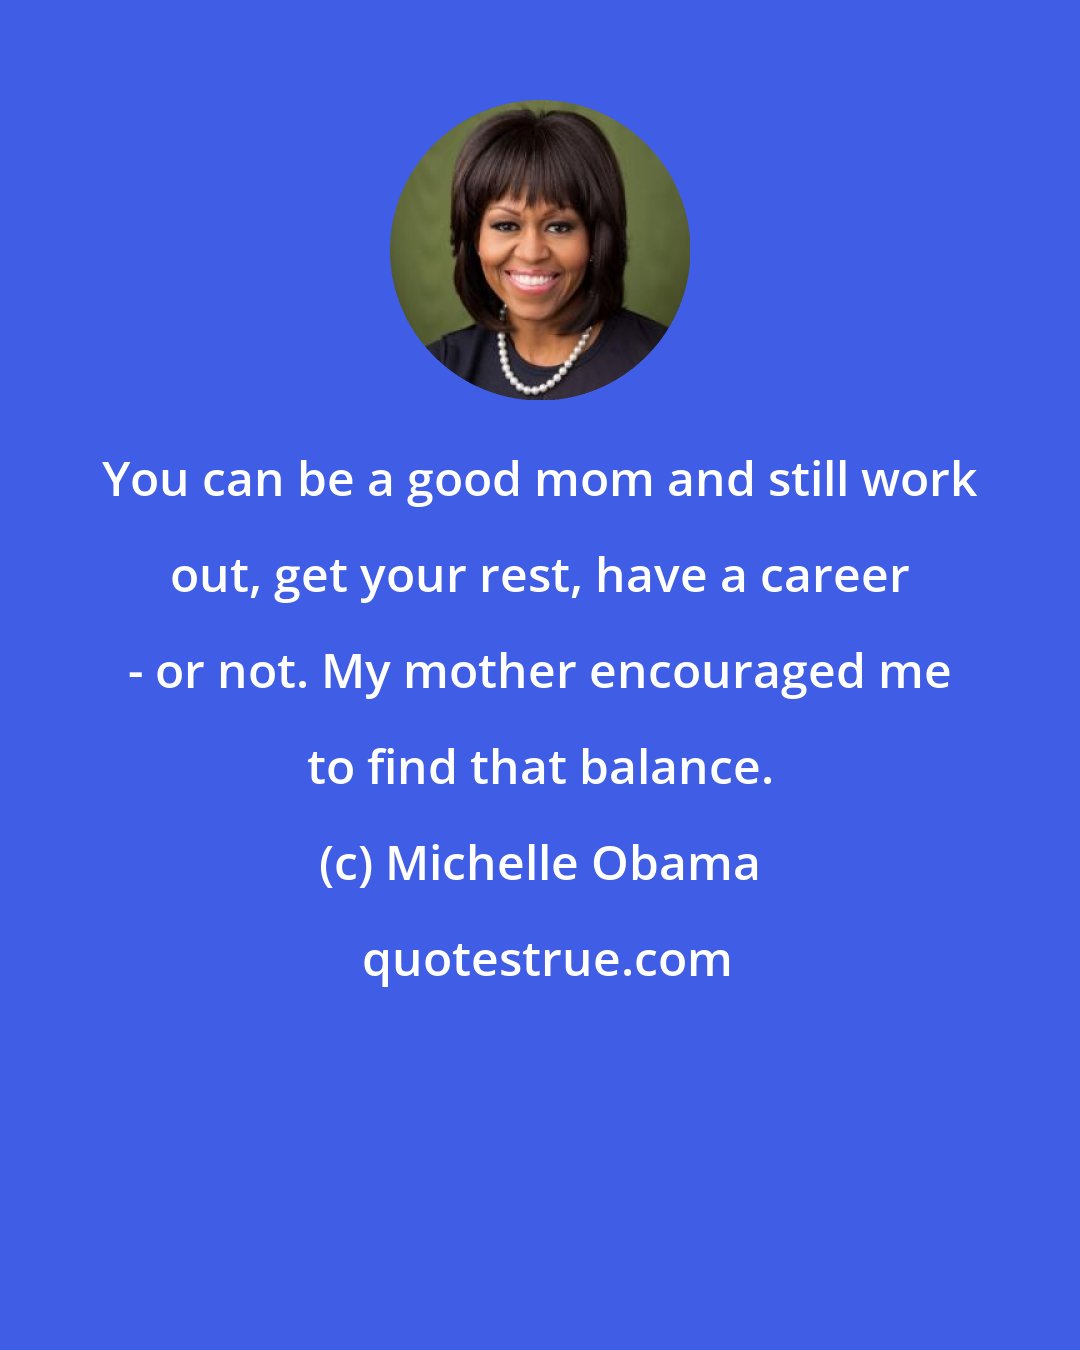 Michelle Obama: You can be a good mom and still work out, get your rest, have a career - or not. My mother encouraged me to find that balance.